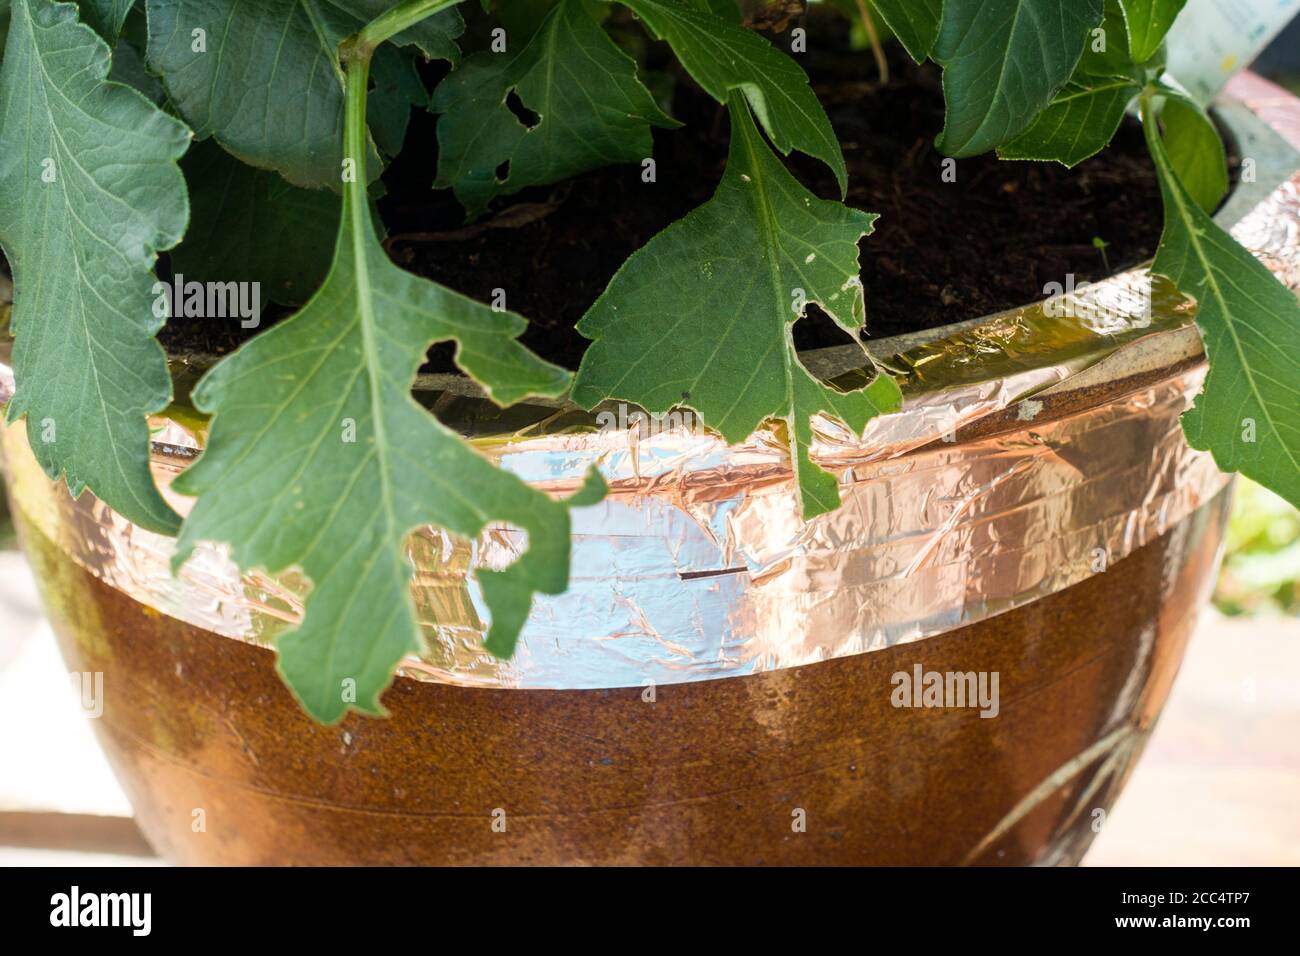 Copper foil being used on Plant Pots to ward of slugs and snails,England, UK. Stock Photo